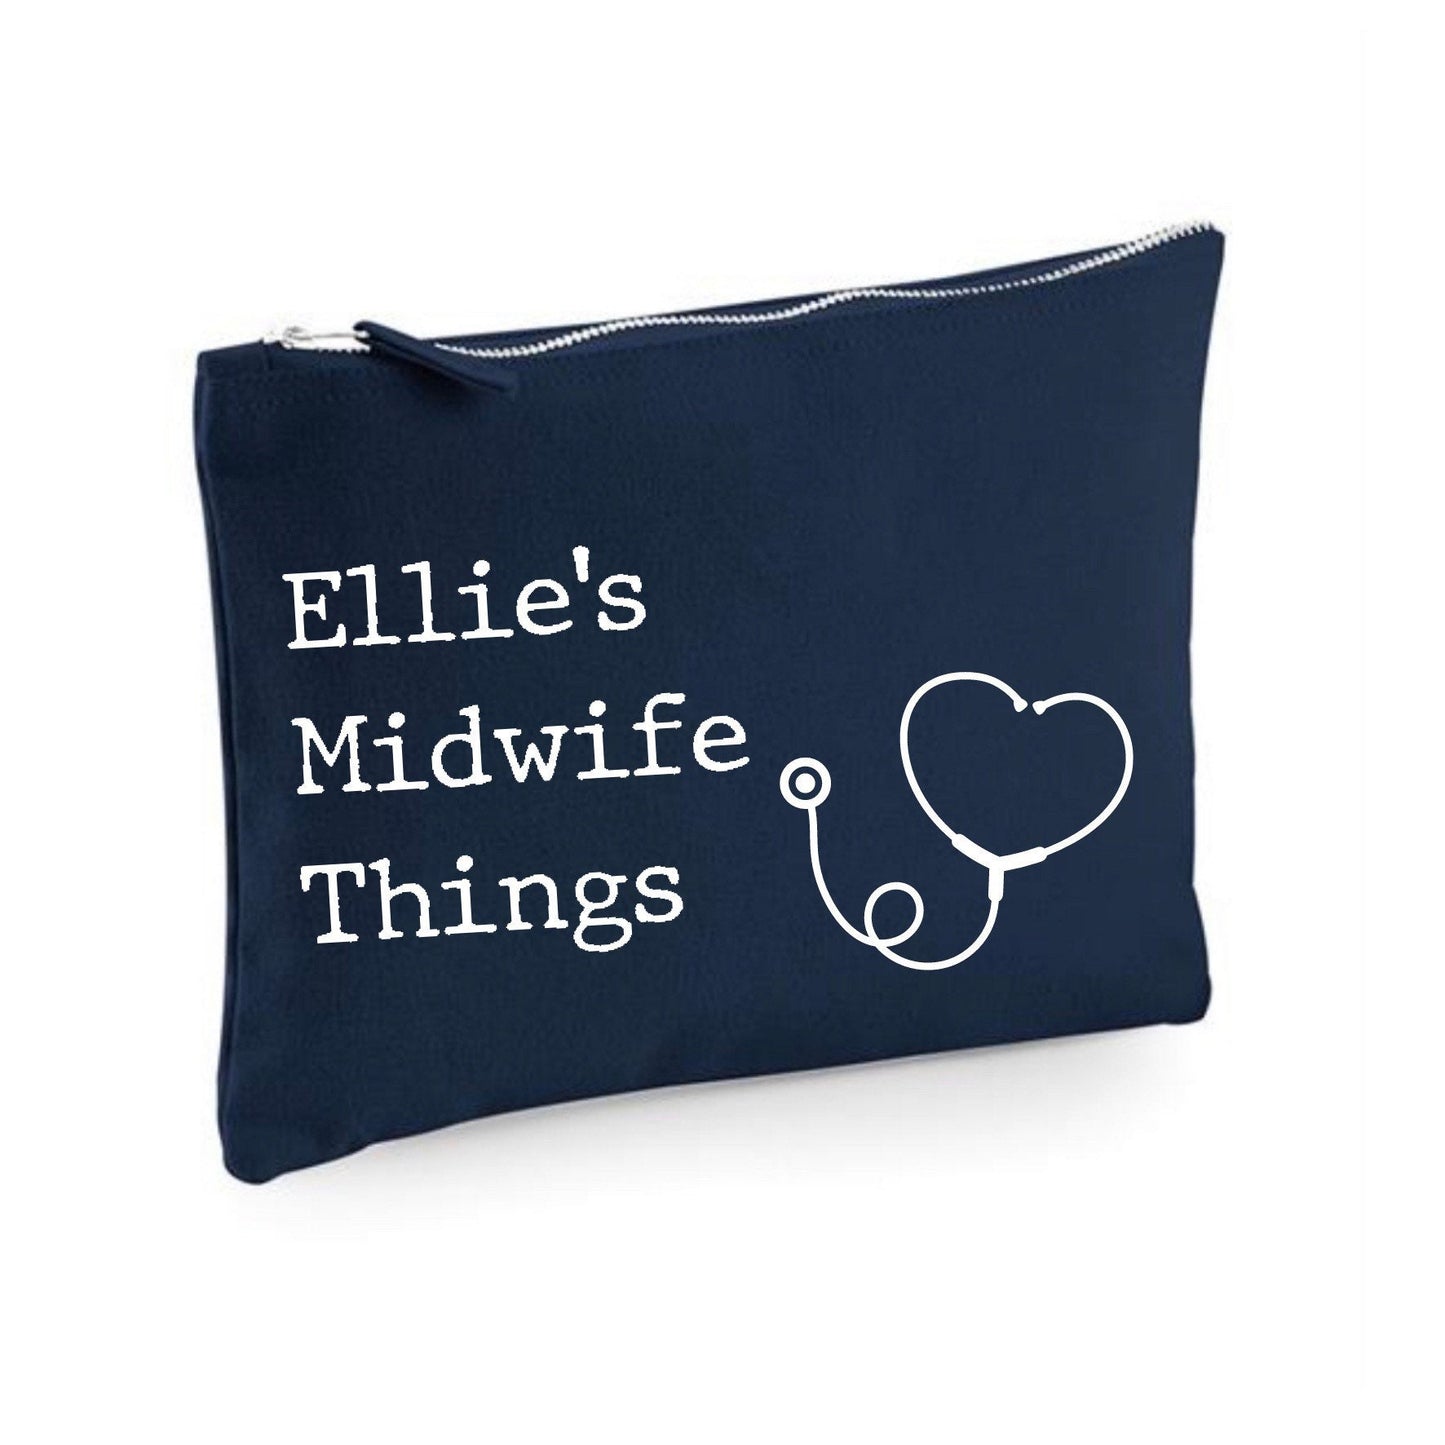 Midwife things pouch, personalised midwifery gift, midwife graduation present, case for stethoscope and fob watch, community midwife bag